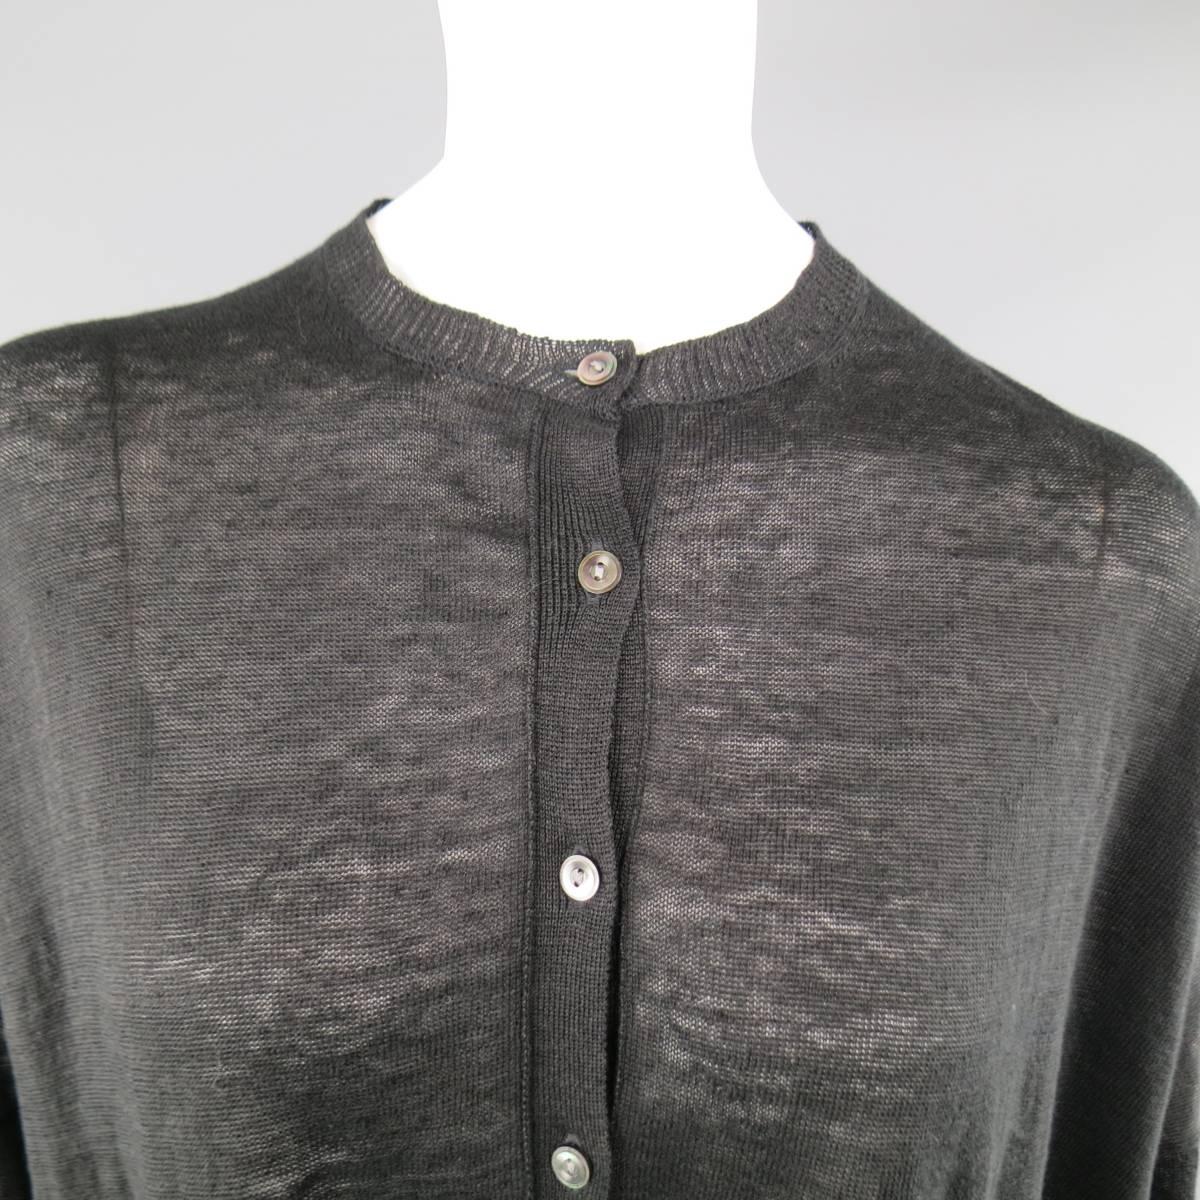 ARTS&SCIENCE drop shoulder cardigan in a light weight, sheer linen knit featuring a wide, oversized fit, button up front, and crew neckline. Made in Japan.
 
Excellent Pre-Owned Condition.
Marked: JP 1
 
Measurements:
 
Shoulder: 31 in.
Bust: 62